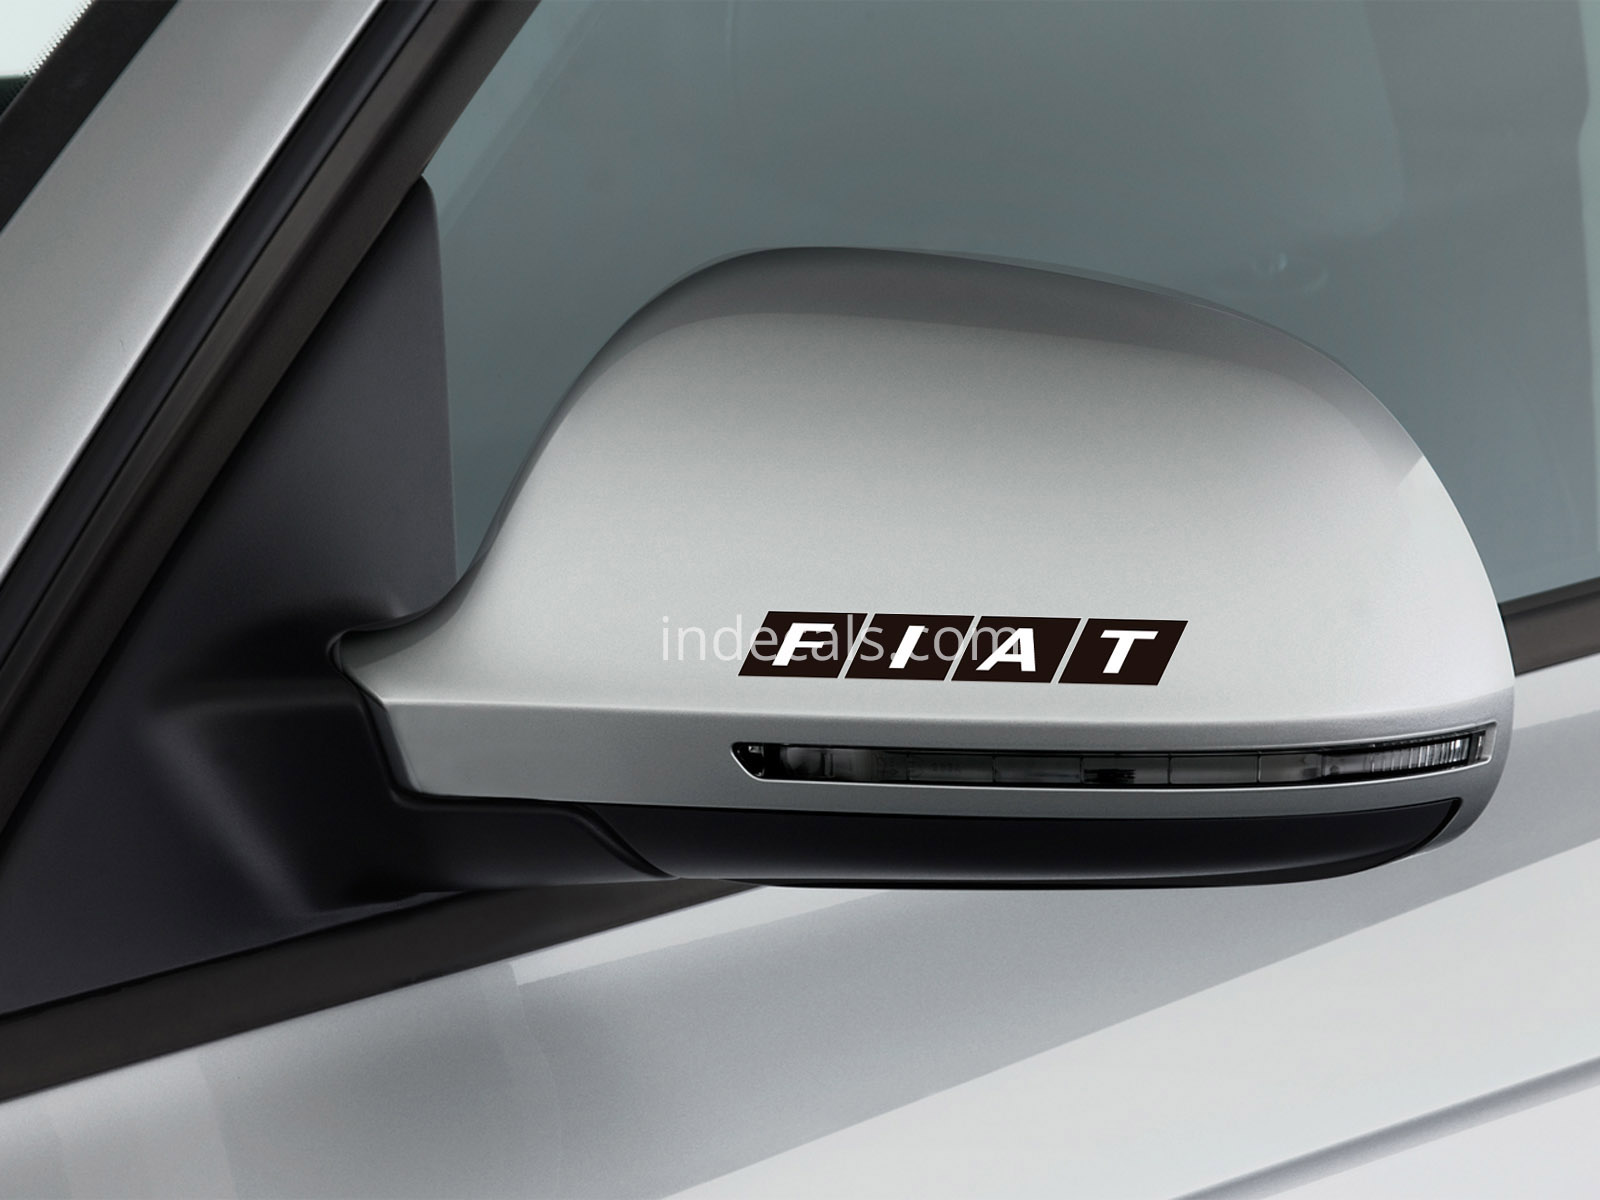 3 x Fiat Stickers for Mirrors - Black